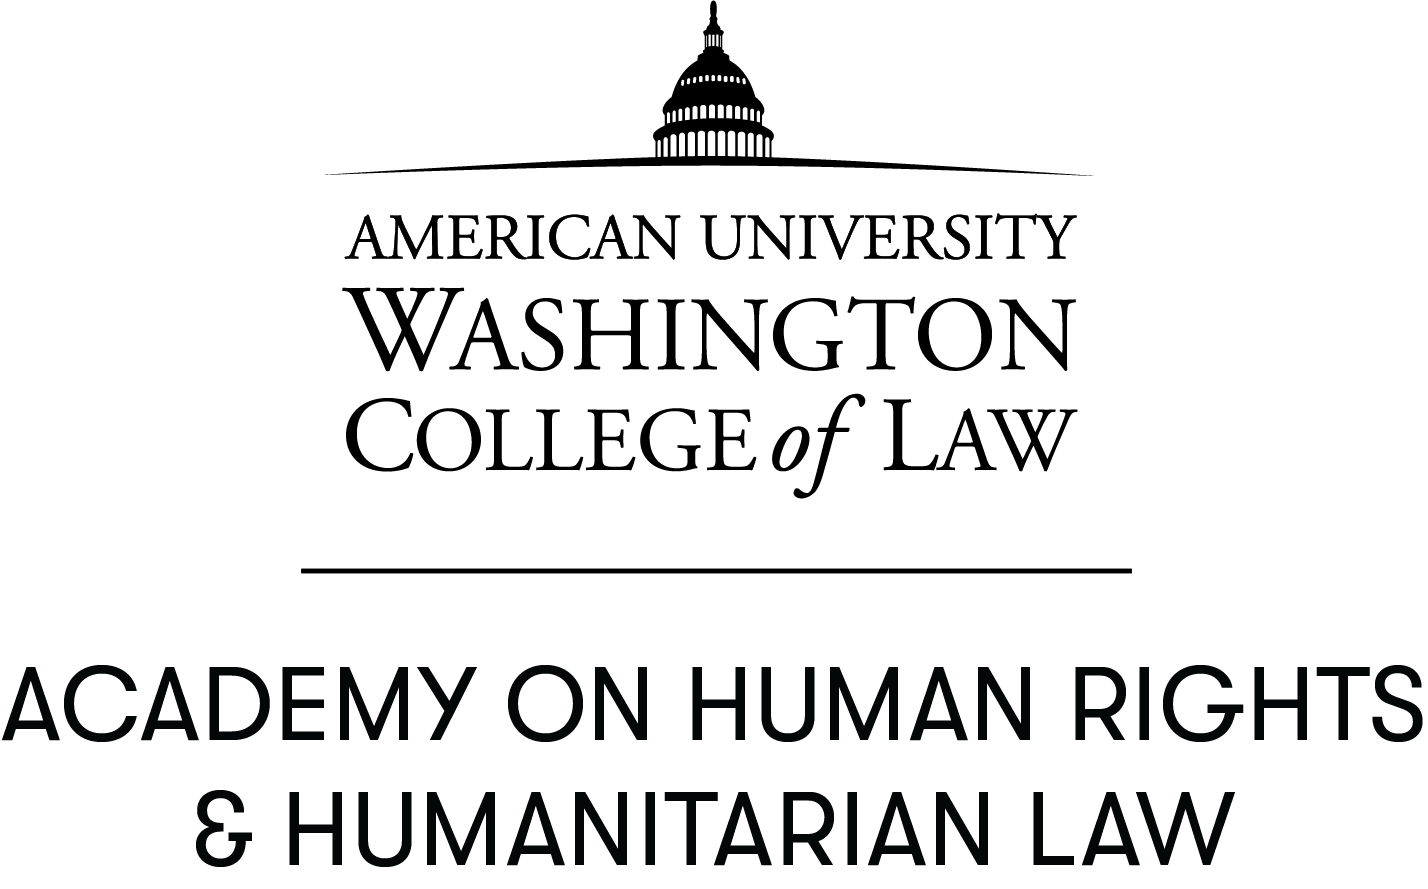 Academy On Human Rights & Humanitarian Law logo (stacked)